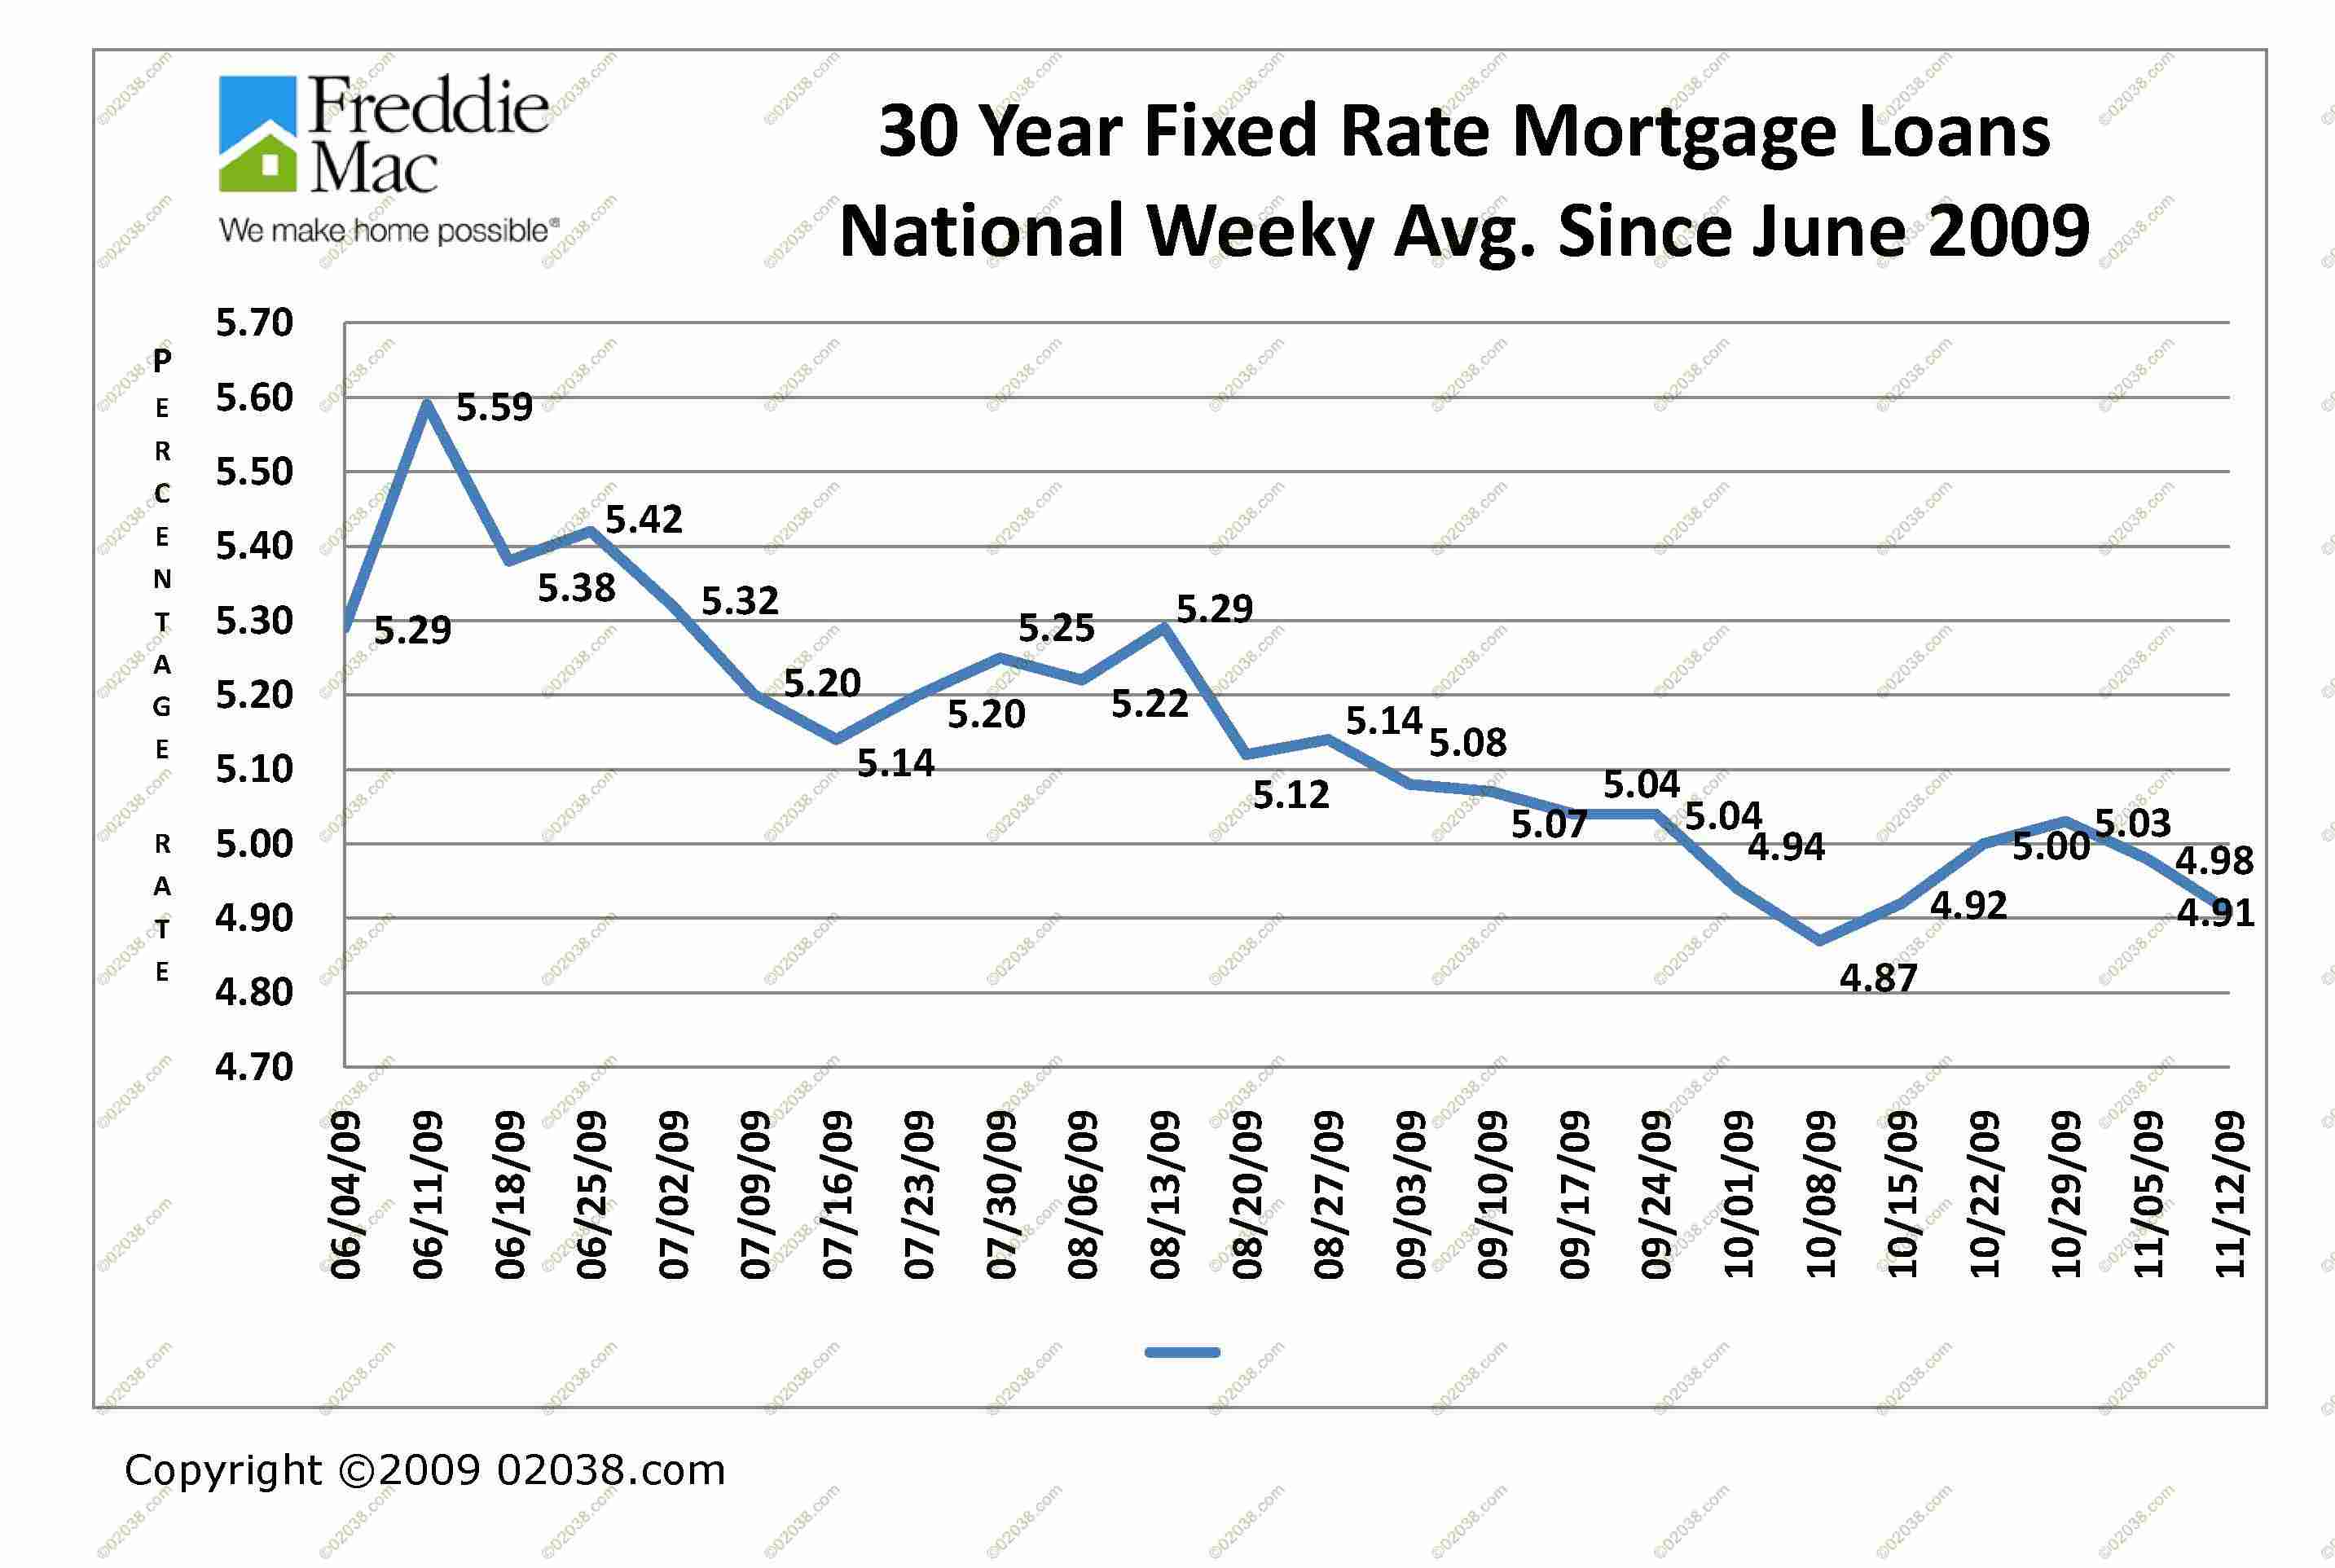 Tips for Getting the Best Mortgage Rates